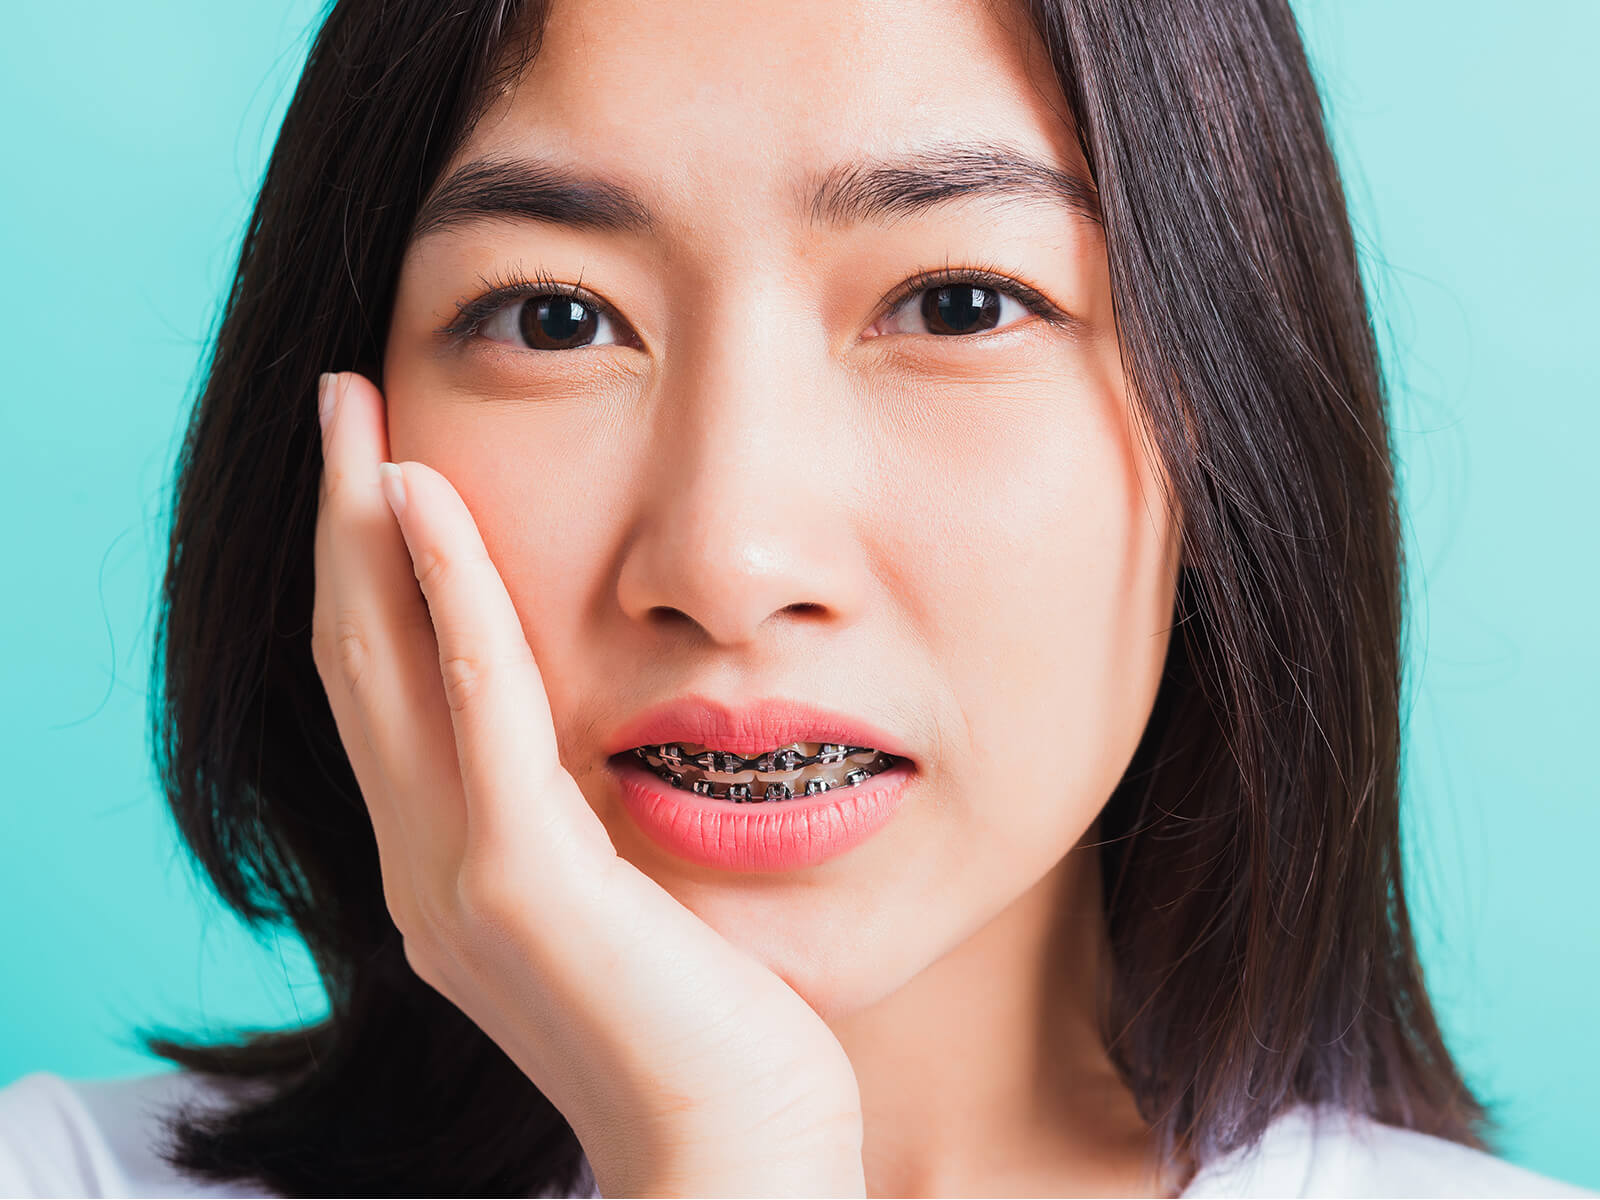 How To Deal With Swollen Gums Due To Braces